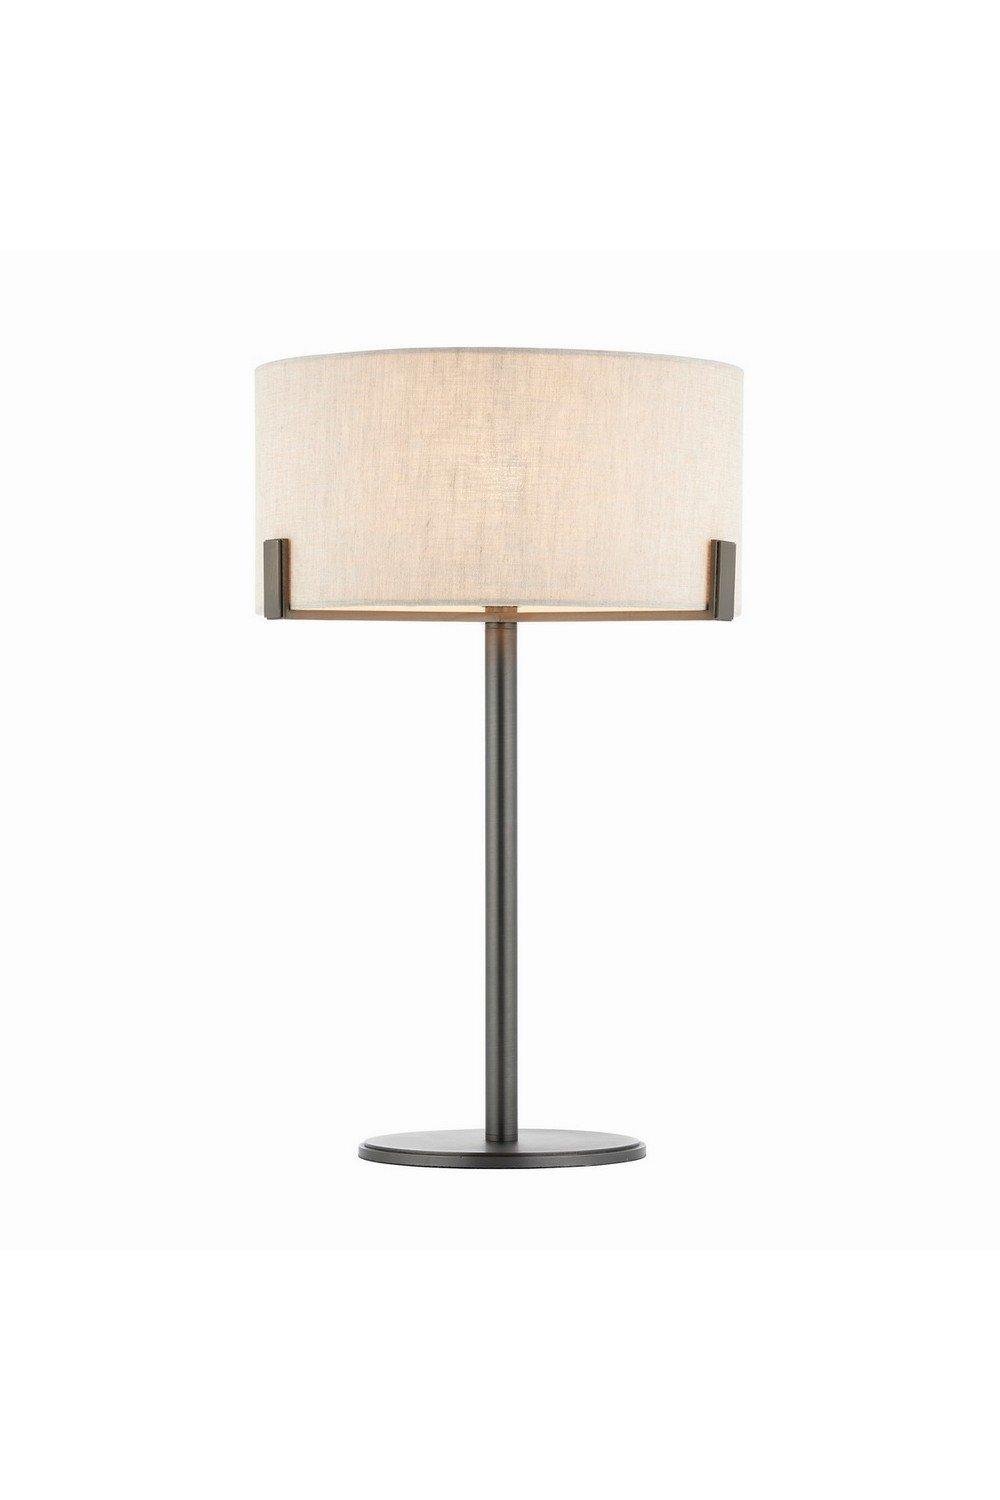 Hayfield Table Lamp Brushed Bronze Effect Plate & Natural Linen 1 Light IP20 E27